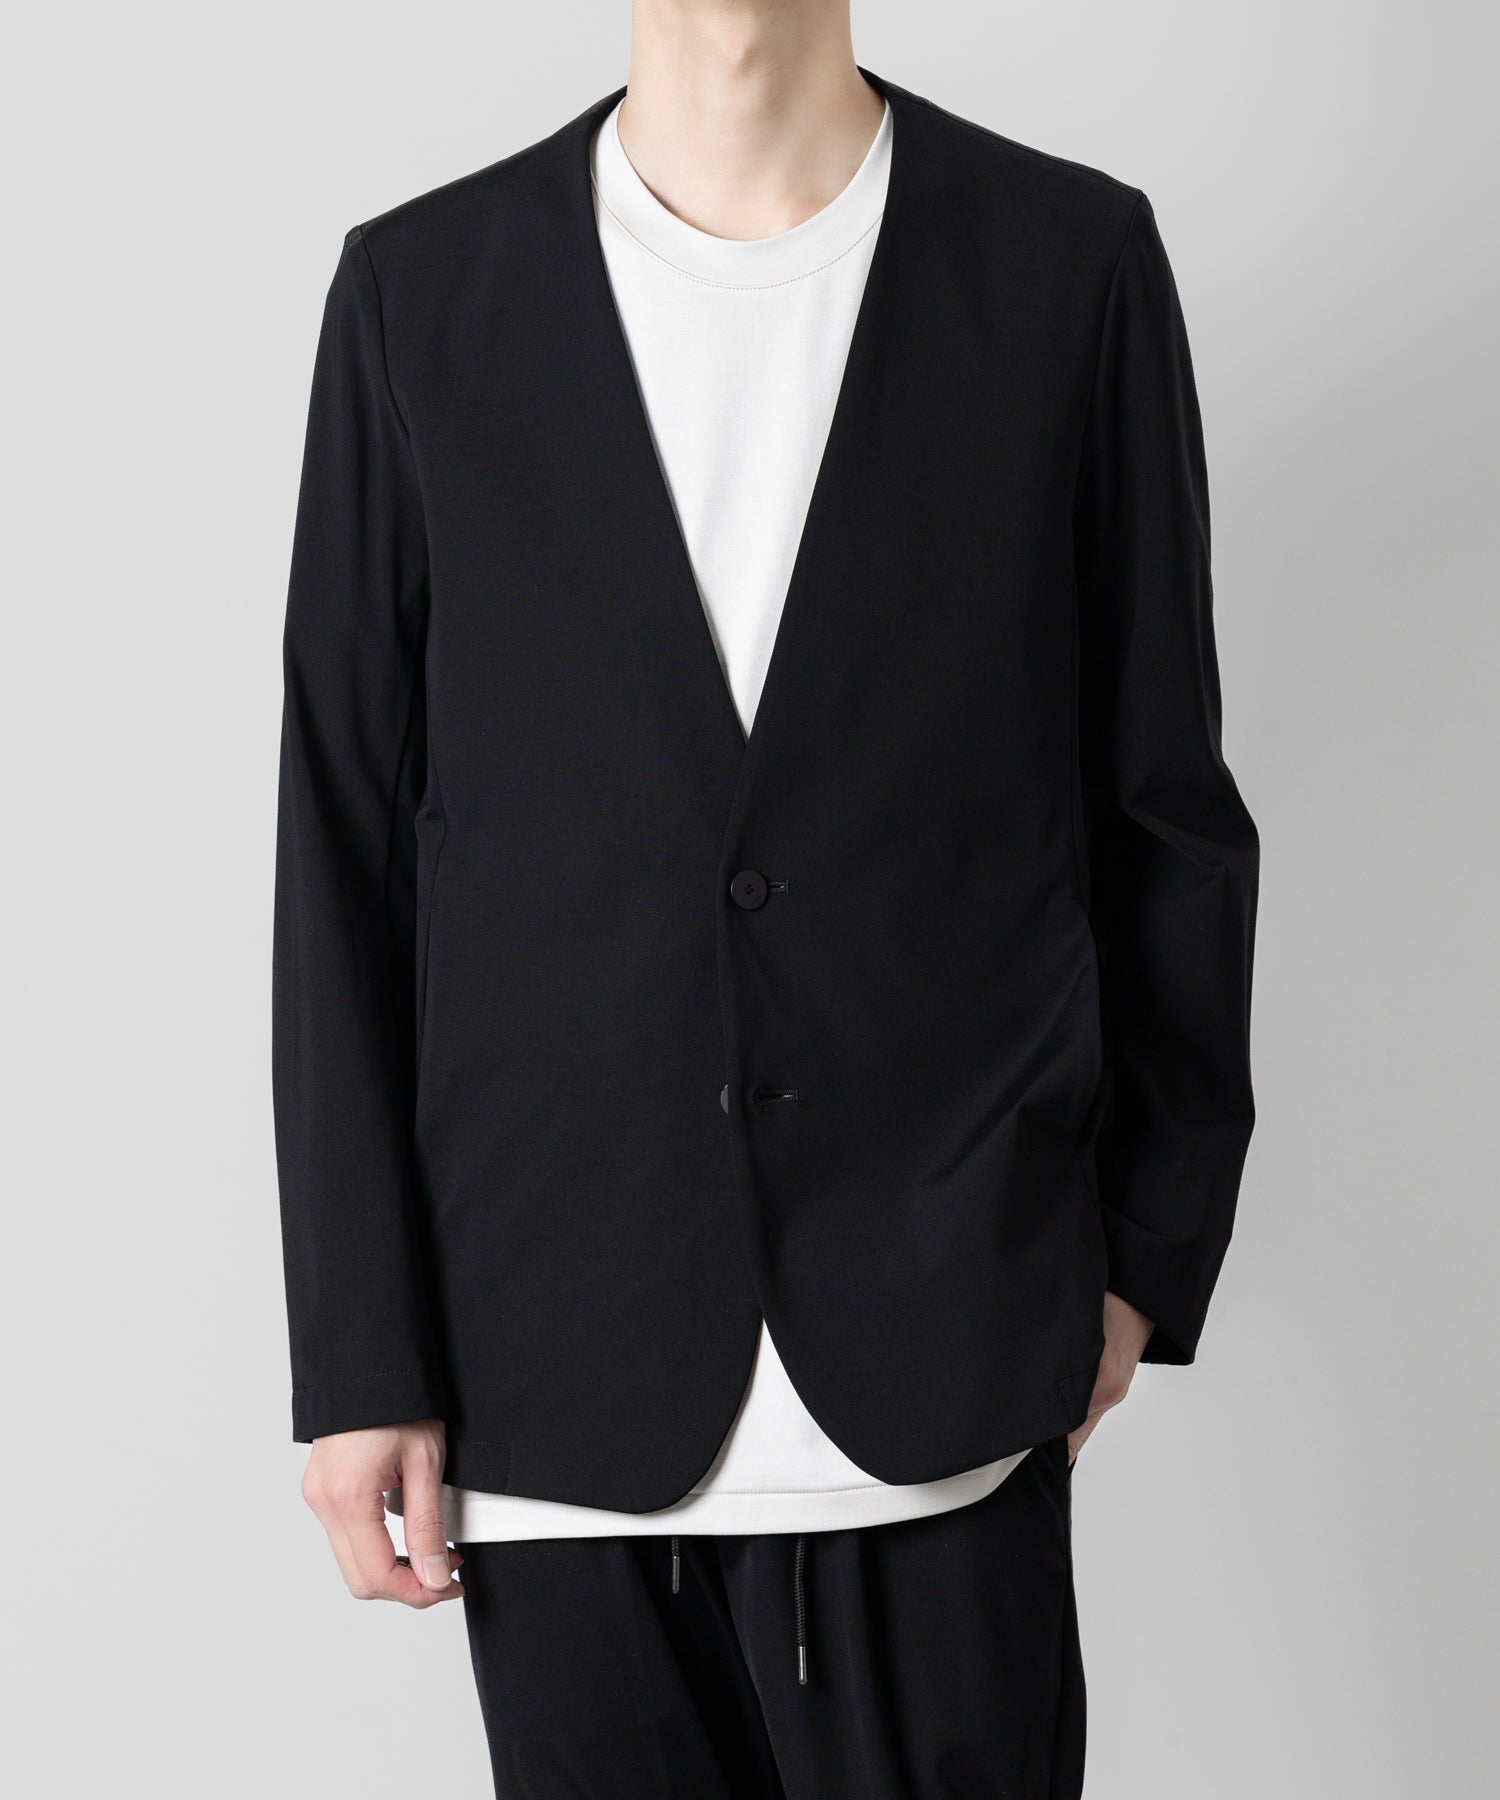 【ATTACHMENT】ATTACHMENT アタッチメントのNY/CO STRETCH JERSEY COLLARLESS JACKET - BLACK 公式通販サイトsession福岡セレクトショップ